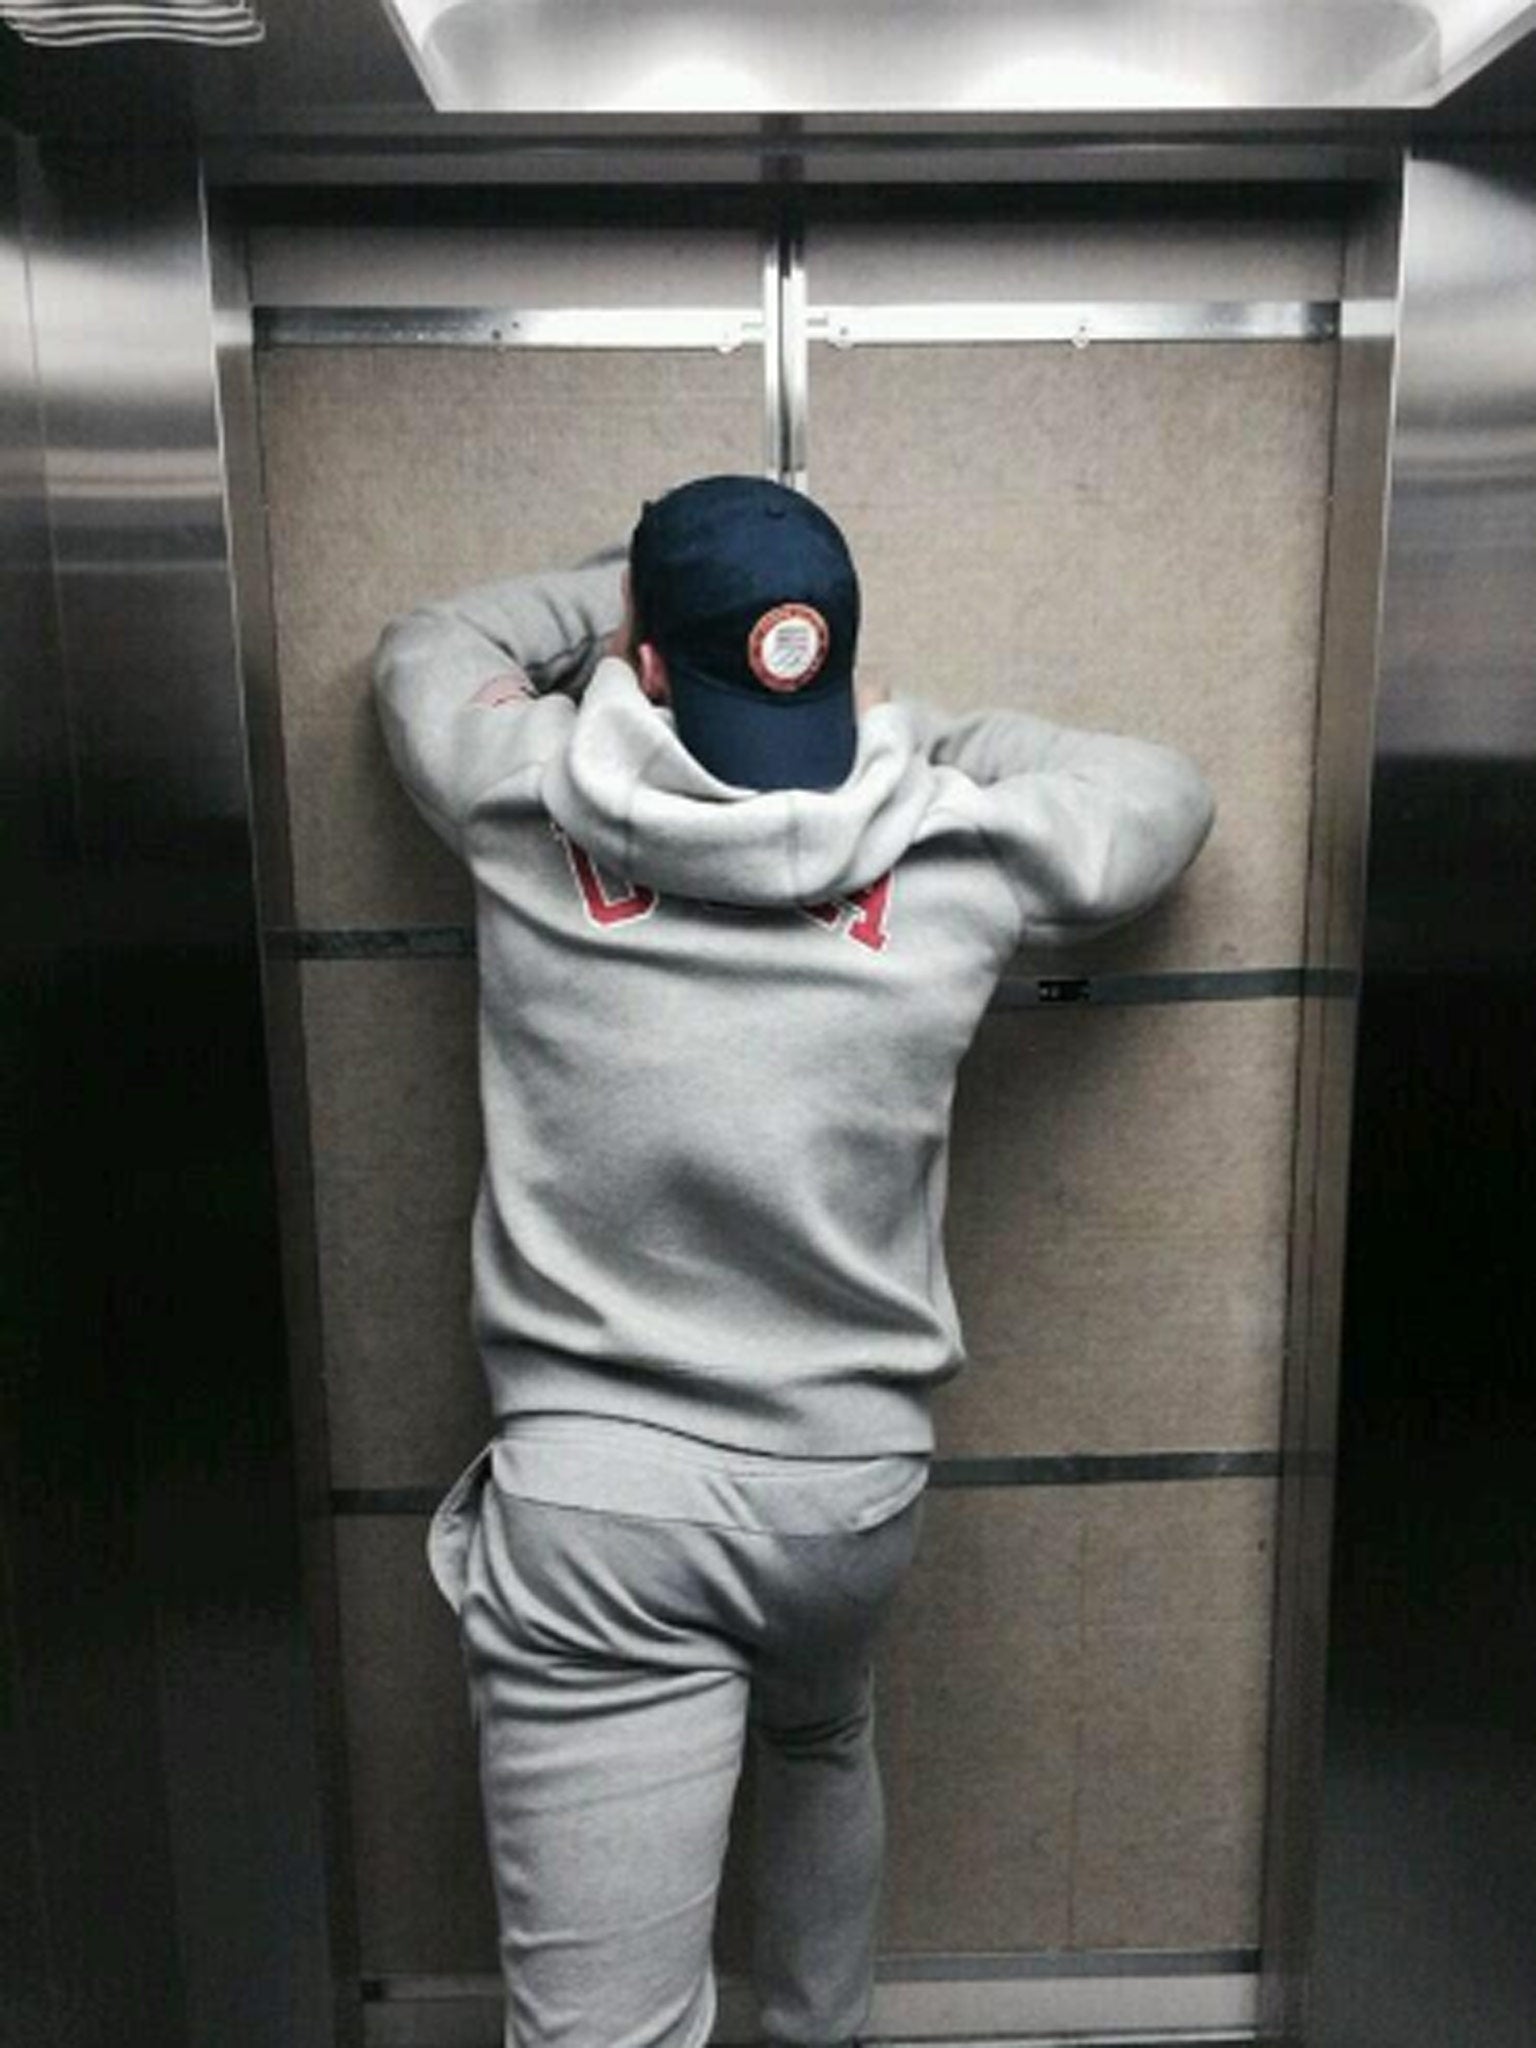 Johnny Quinn, an American bobsledder, finds himself trapped in a lift